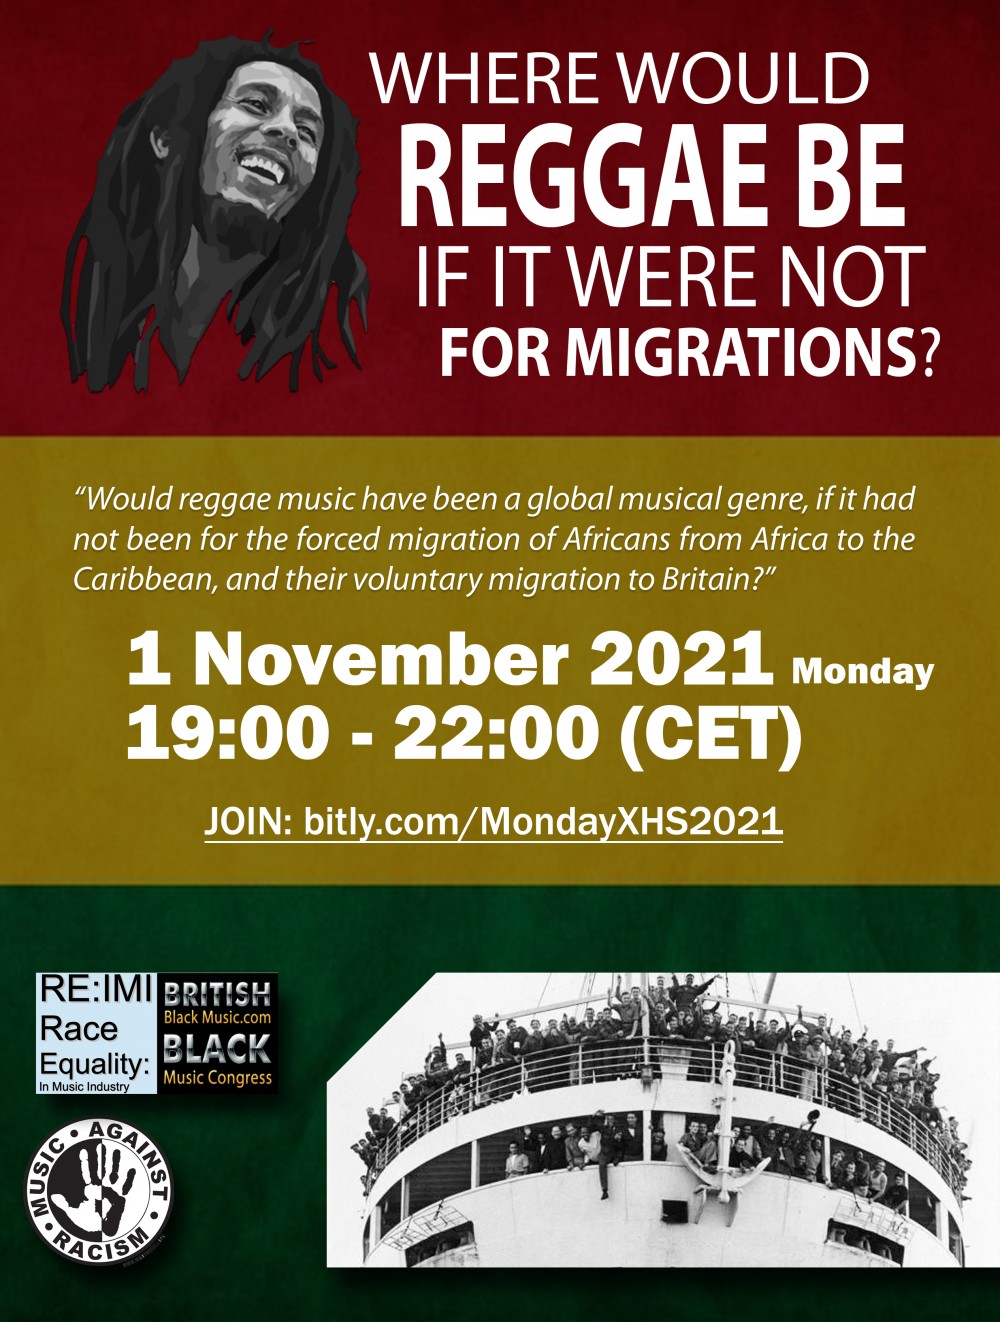 WHERE WOULD REGGAE BE IF IT WERE NOT FOR MIGRATION?